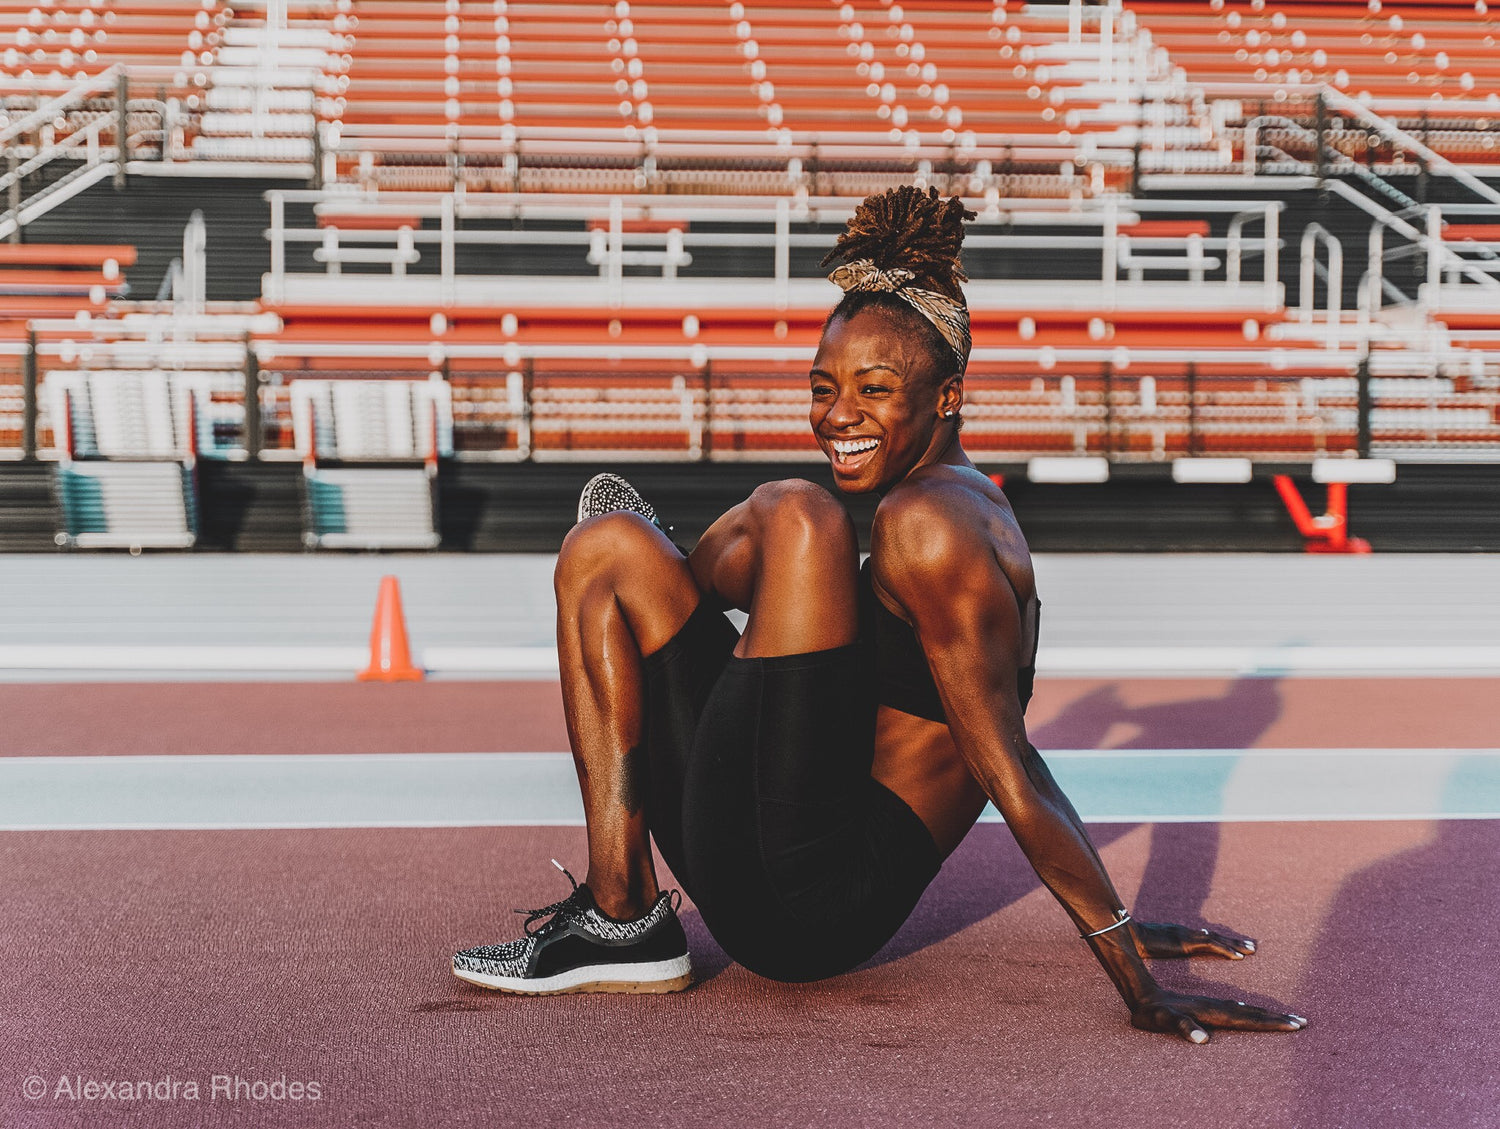 Celebrate World Running Day with Professional Athlete, Dominique Blake